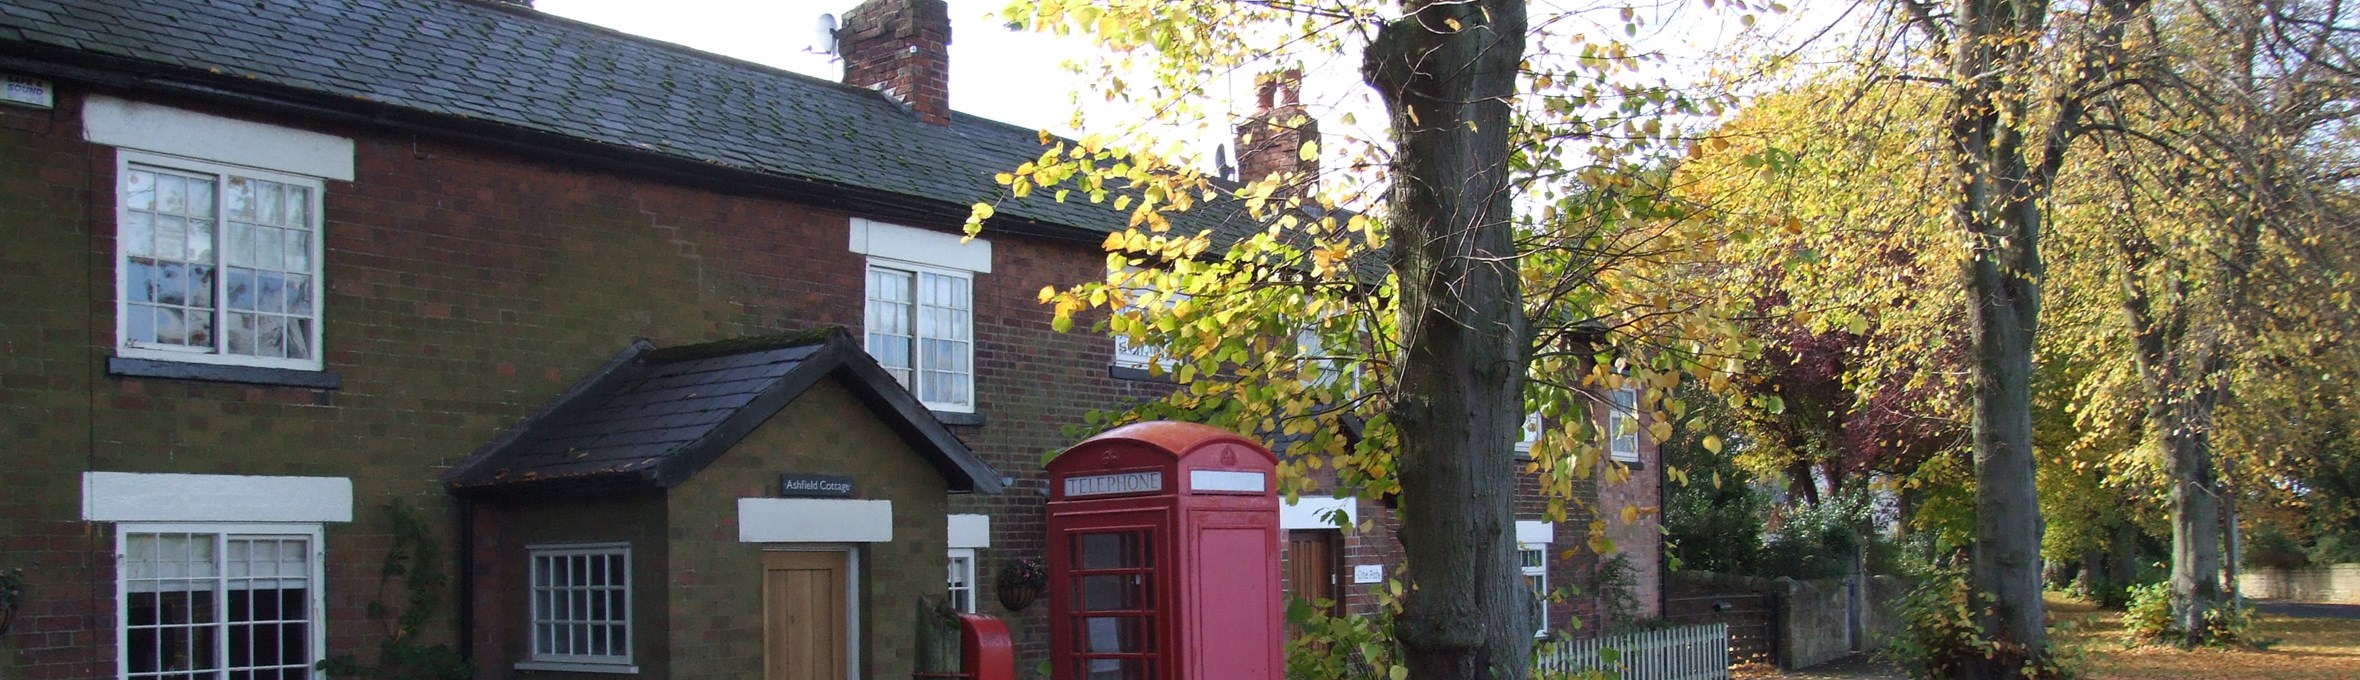 Row of brick cottages under trees with red phone box